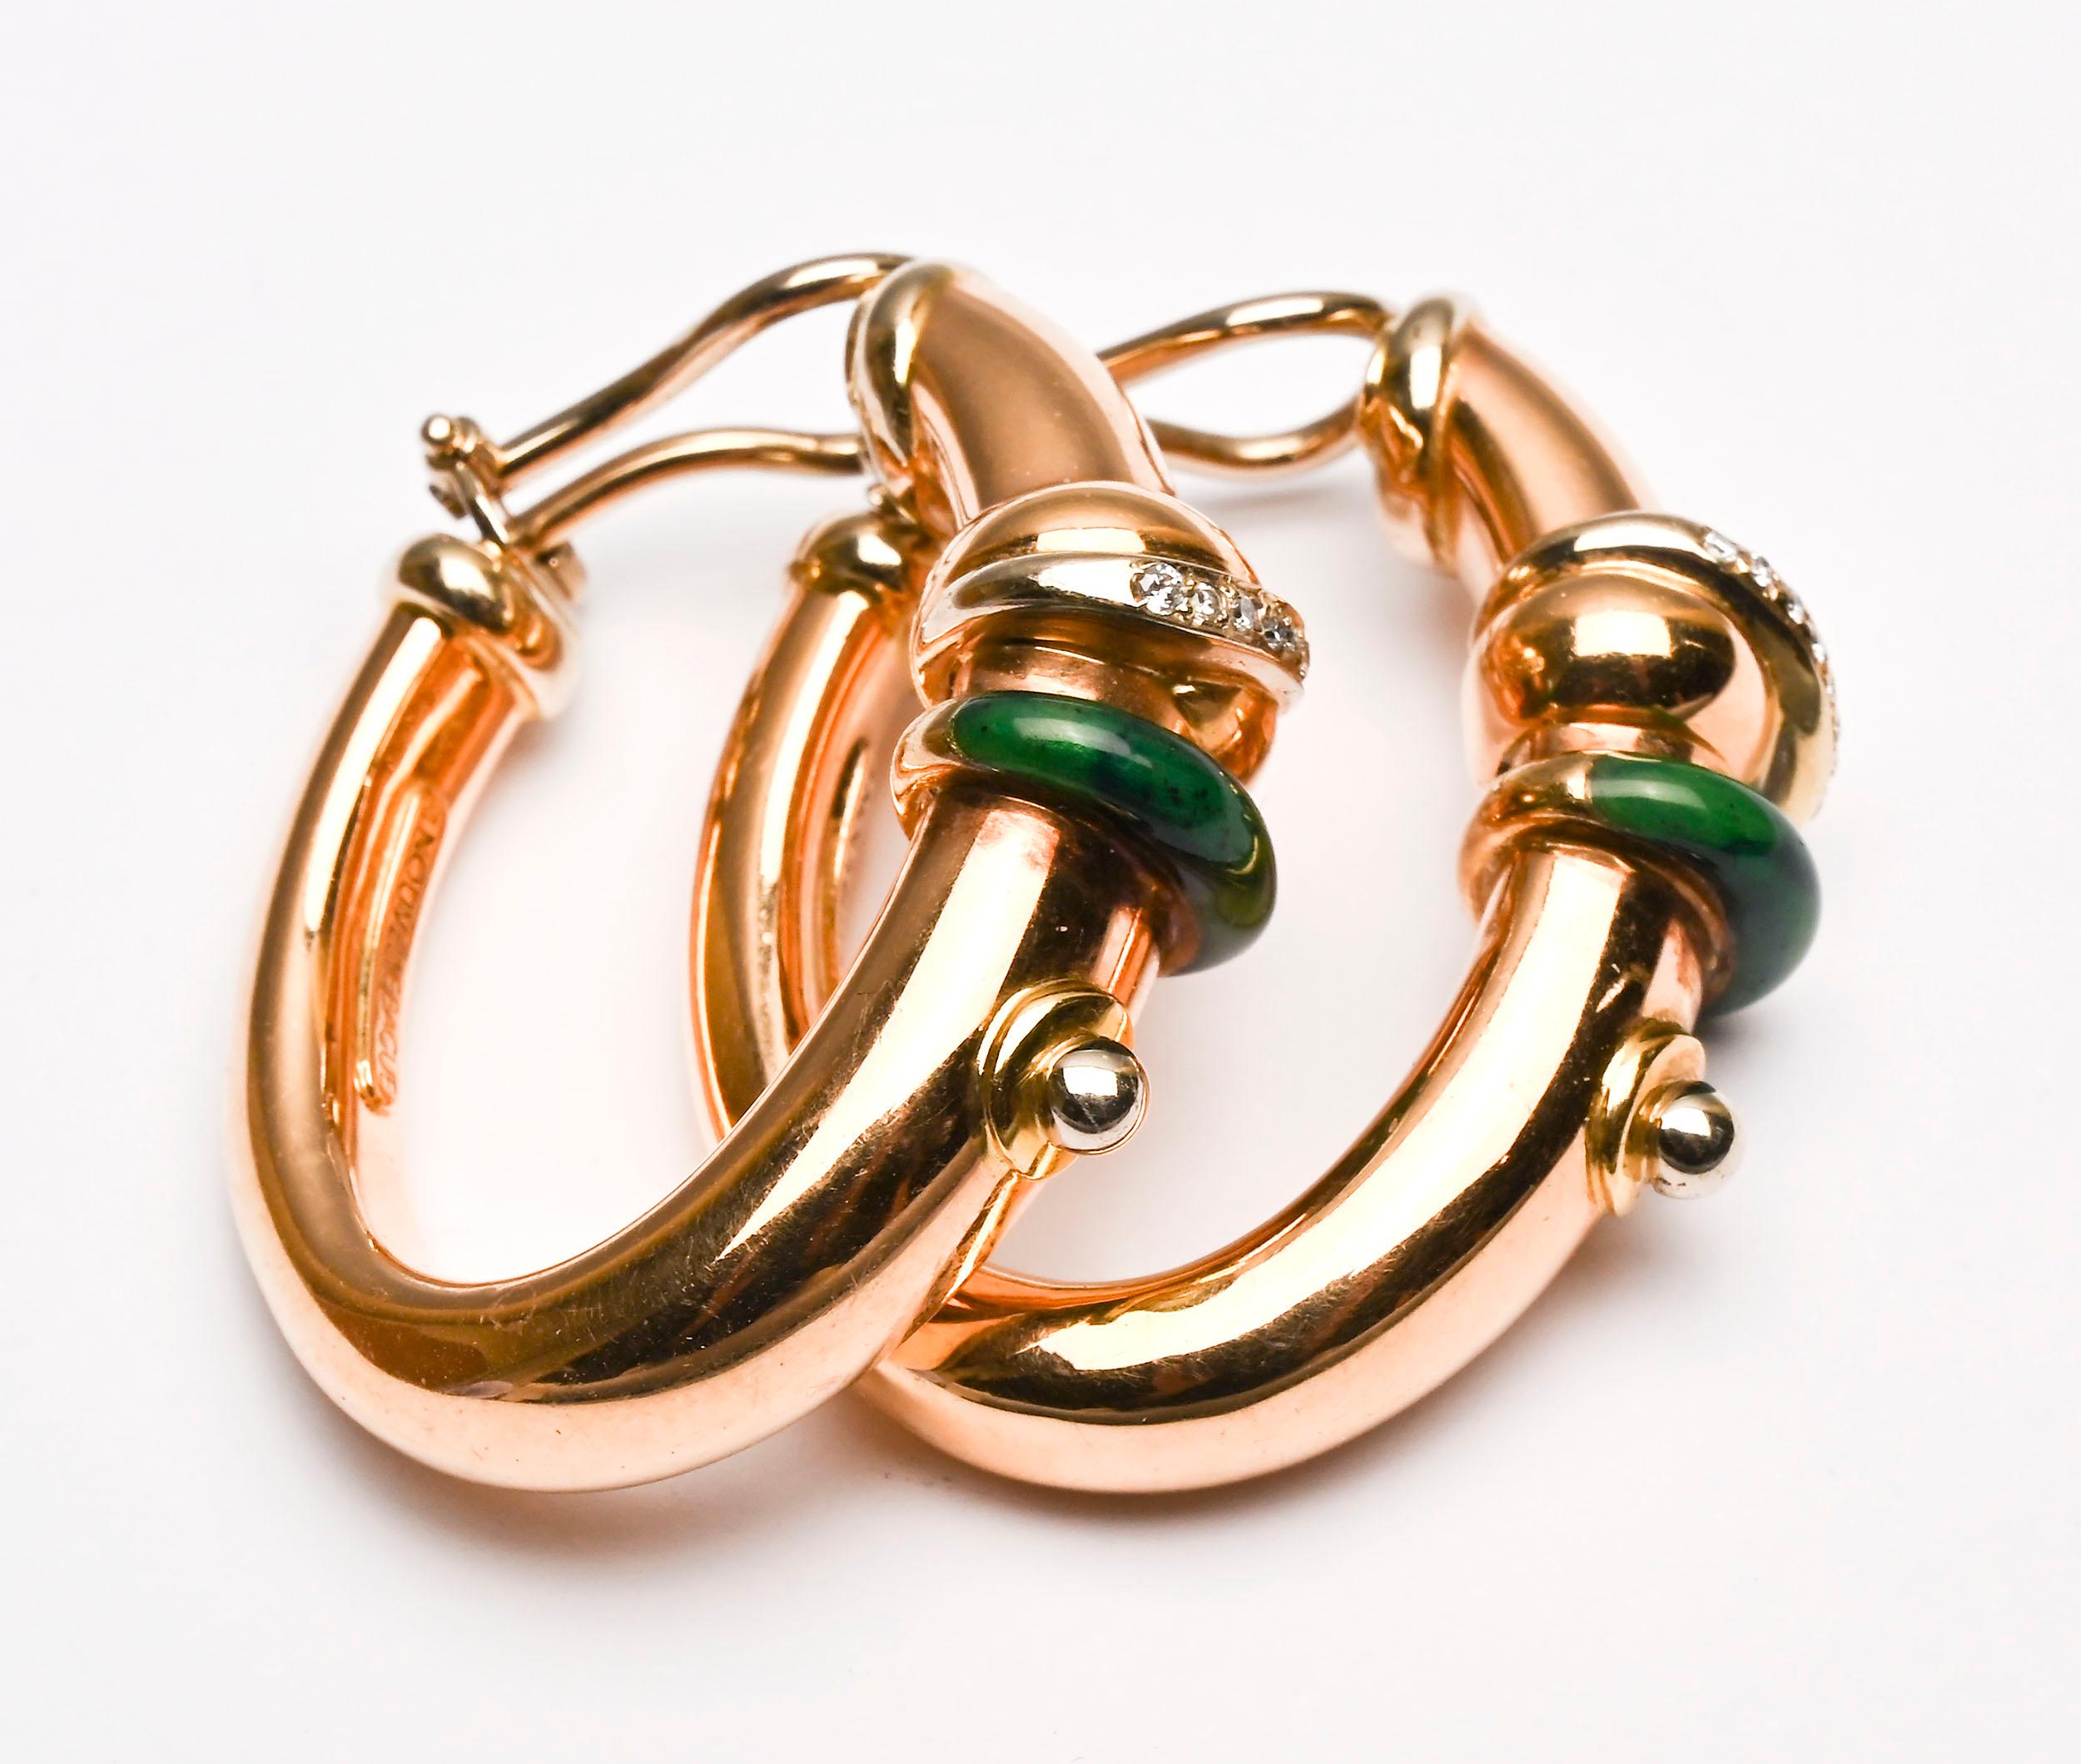 Sporty and sophisticated oval hoop earrings by La Nouvelle Bague.  A band of green enamel encircles the hoop with another diagonal band of pave diamonds. above it. Clip backs can be converted to posts.
The earrings are 1 7/16